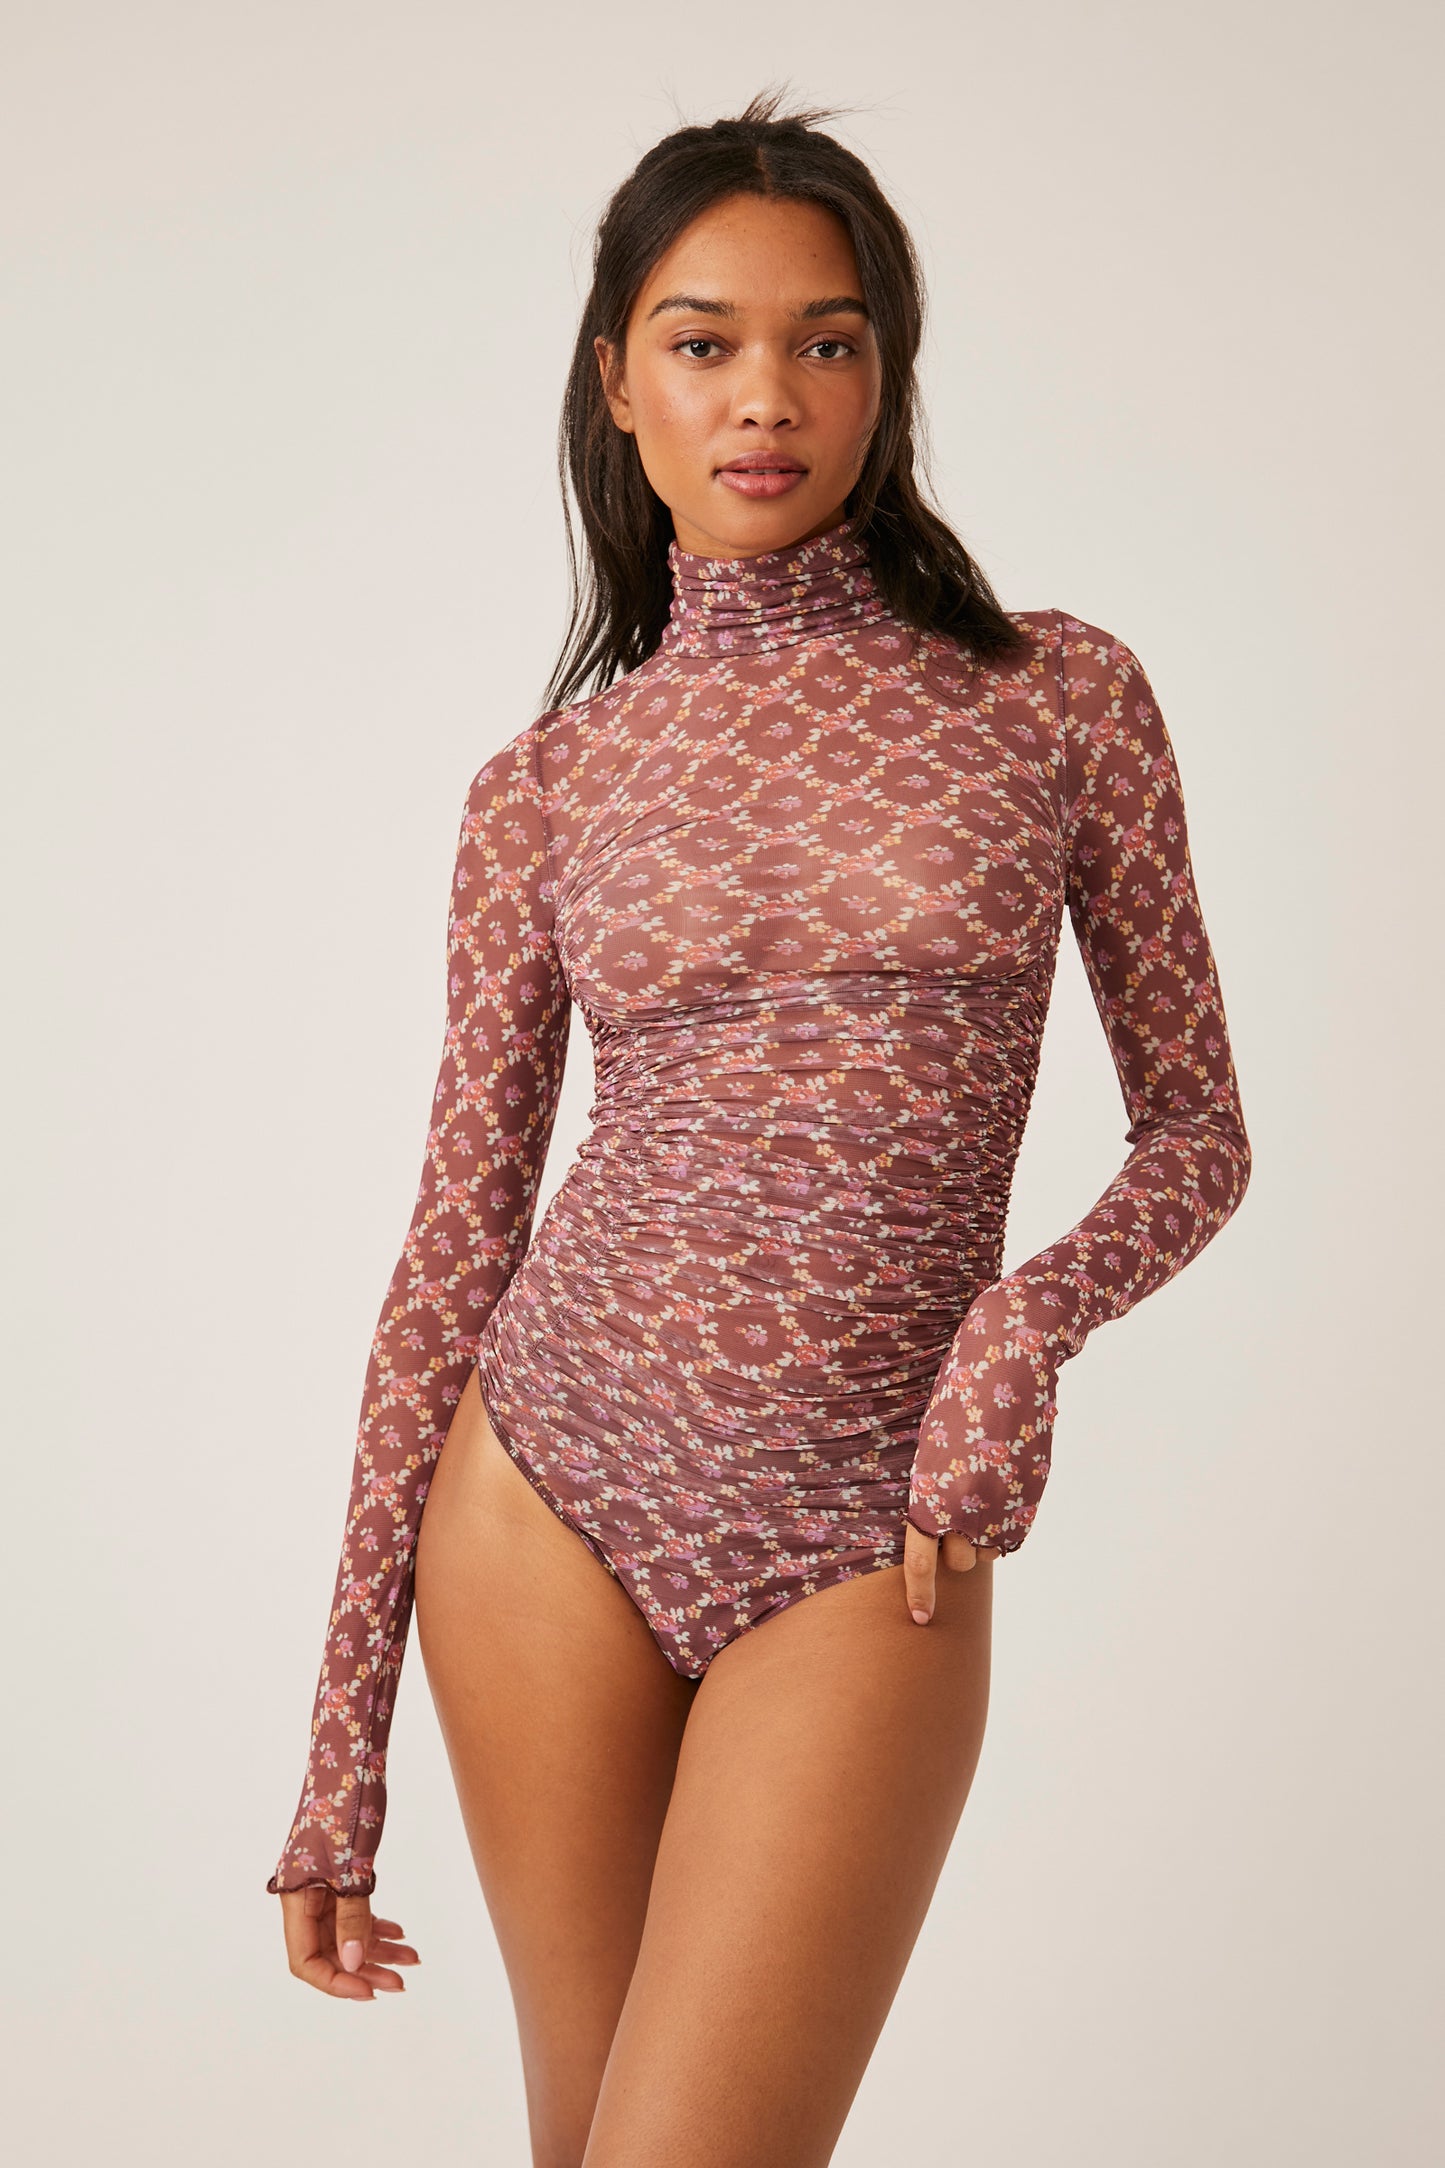 Free People Under It all Printed Body Suit